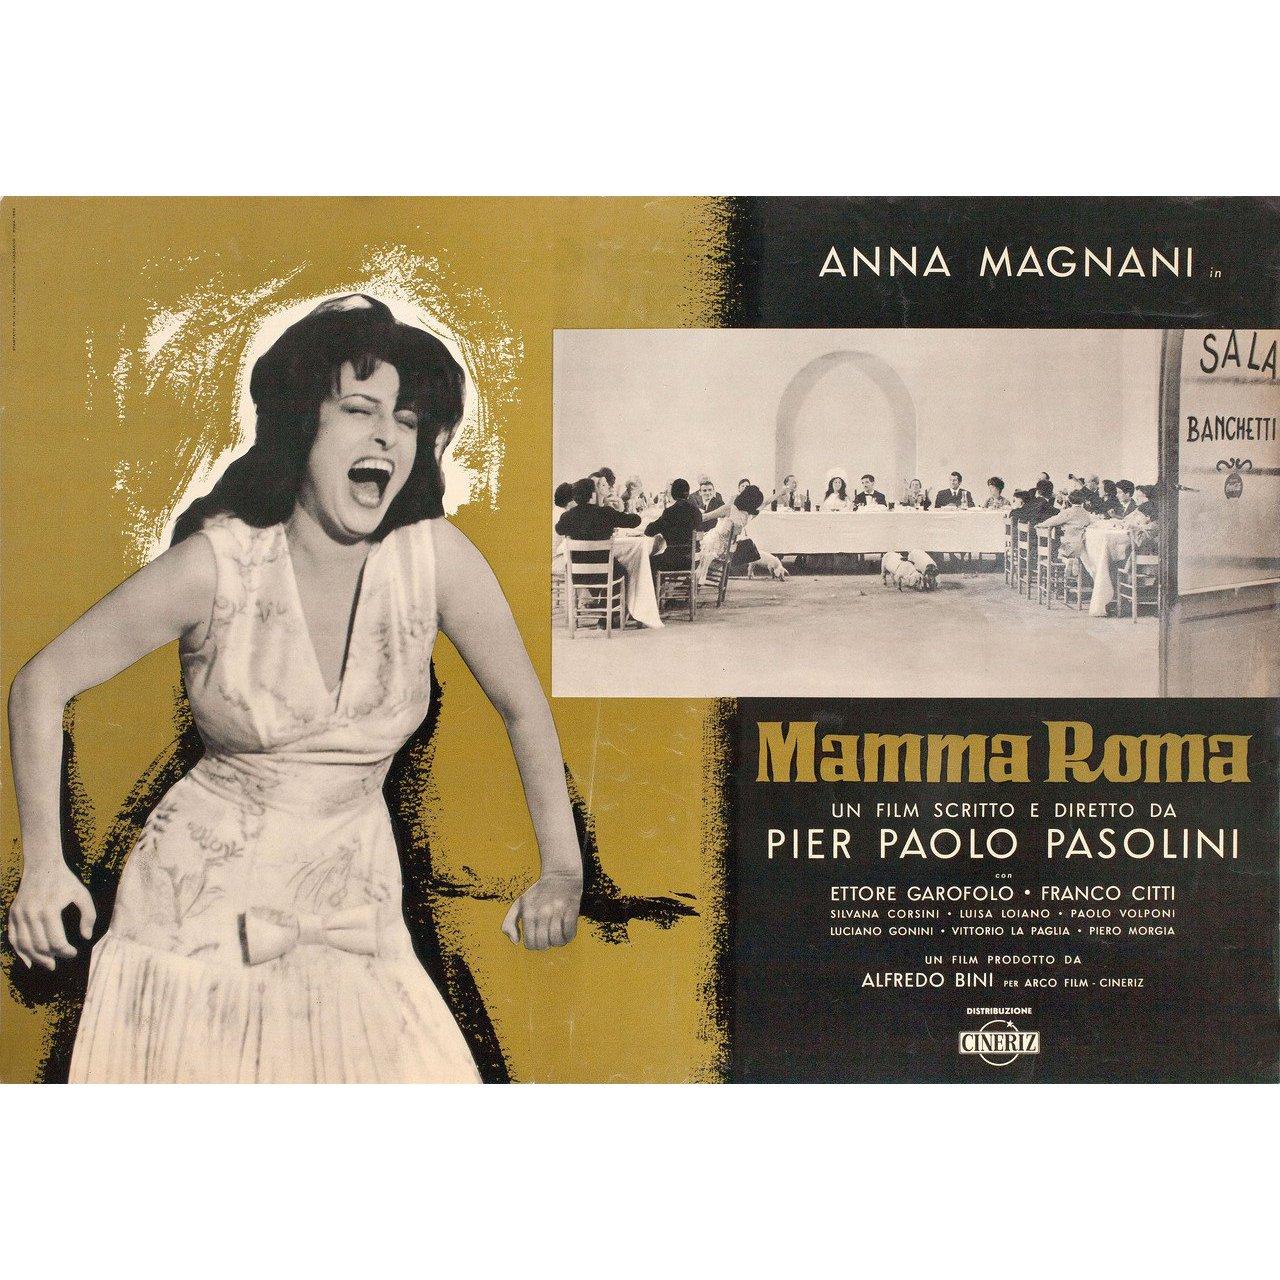 Original 1962 Italian fotobusta poster for the film Mamma Roma directed by Pier Paolo Pasolini with Anna Magnani / Ettore Garofolo / Franco Citti / Silvana Corsini. Very good fine condition, rolled. Please note: the size is stated in inches and the